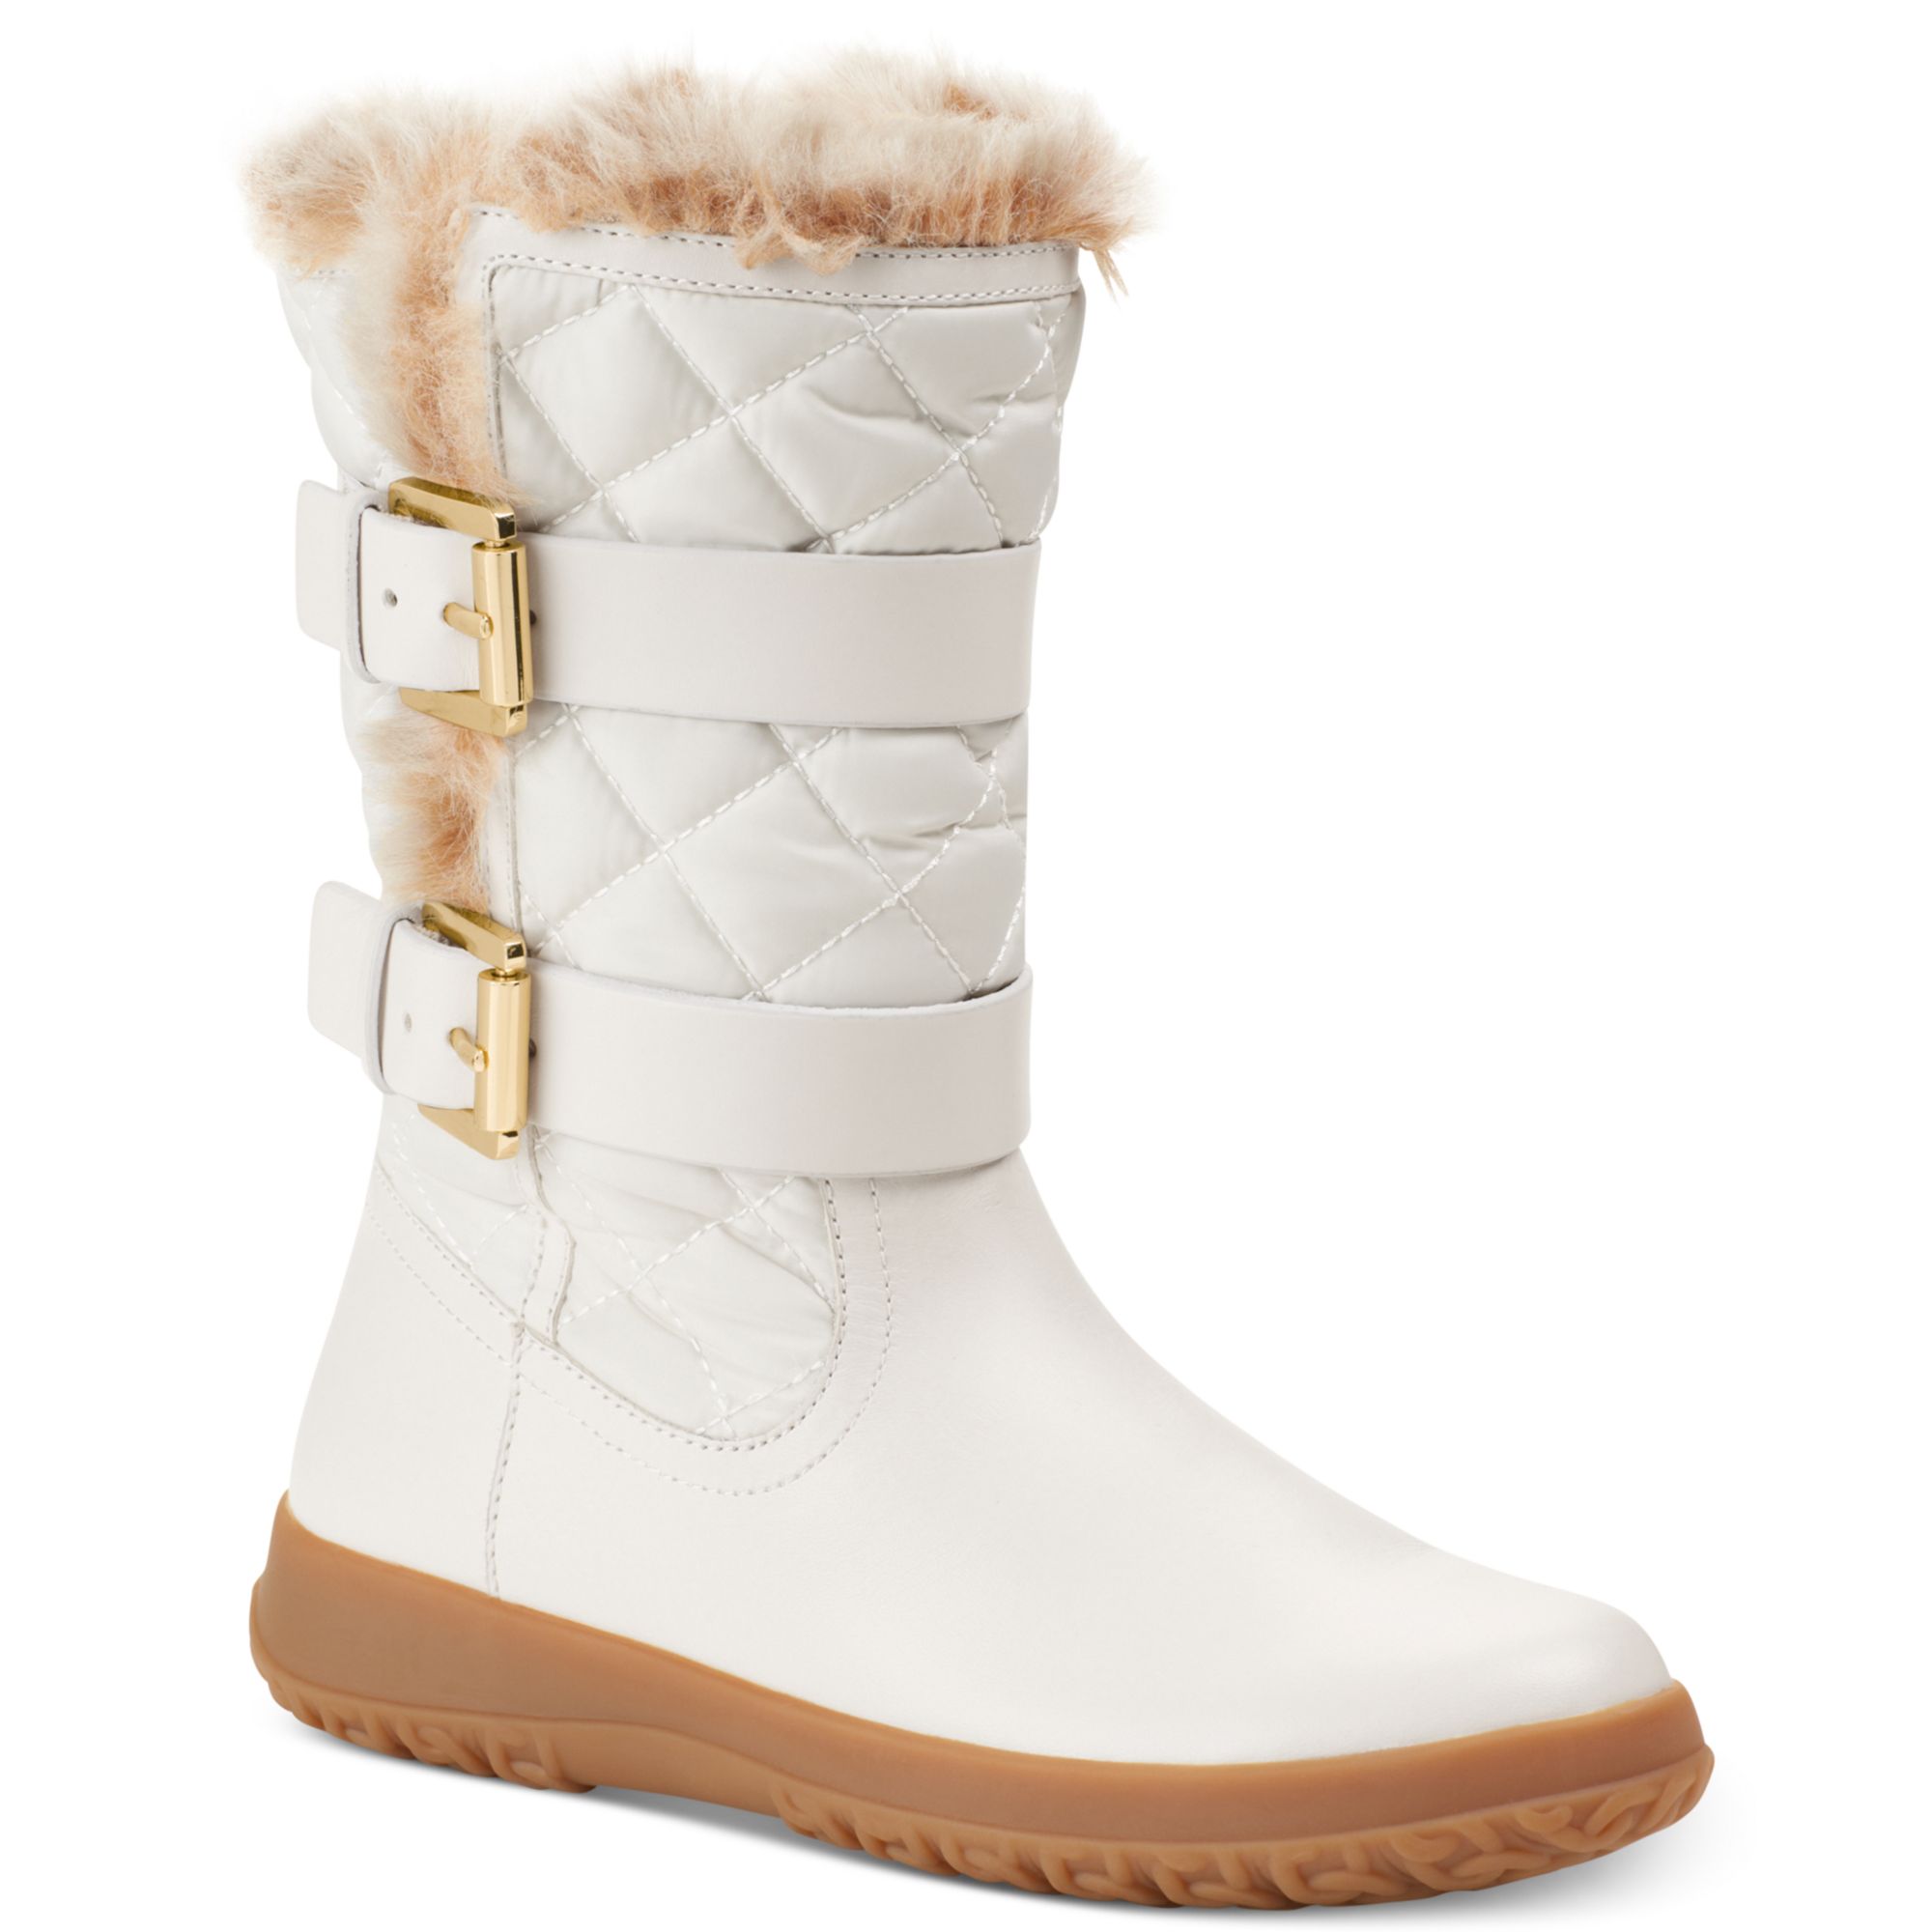 Lyst - Michael Kors Aaran Cold Weather Fauxfur Boots in White